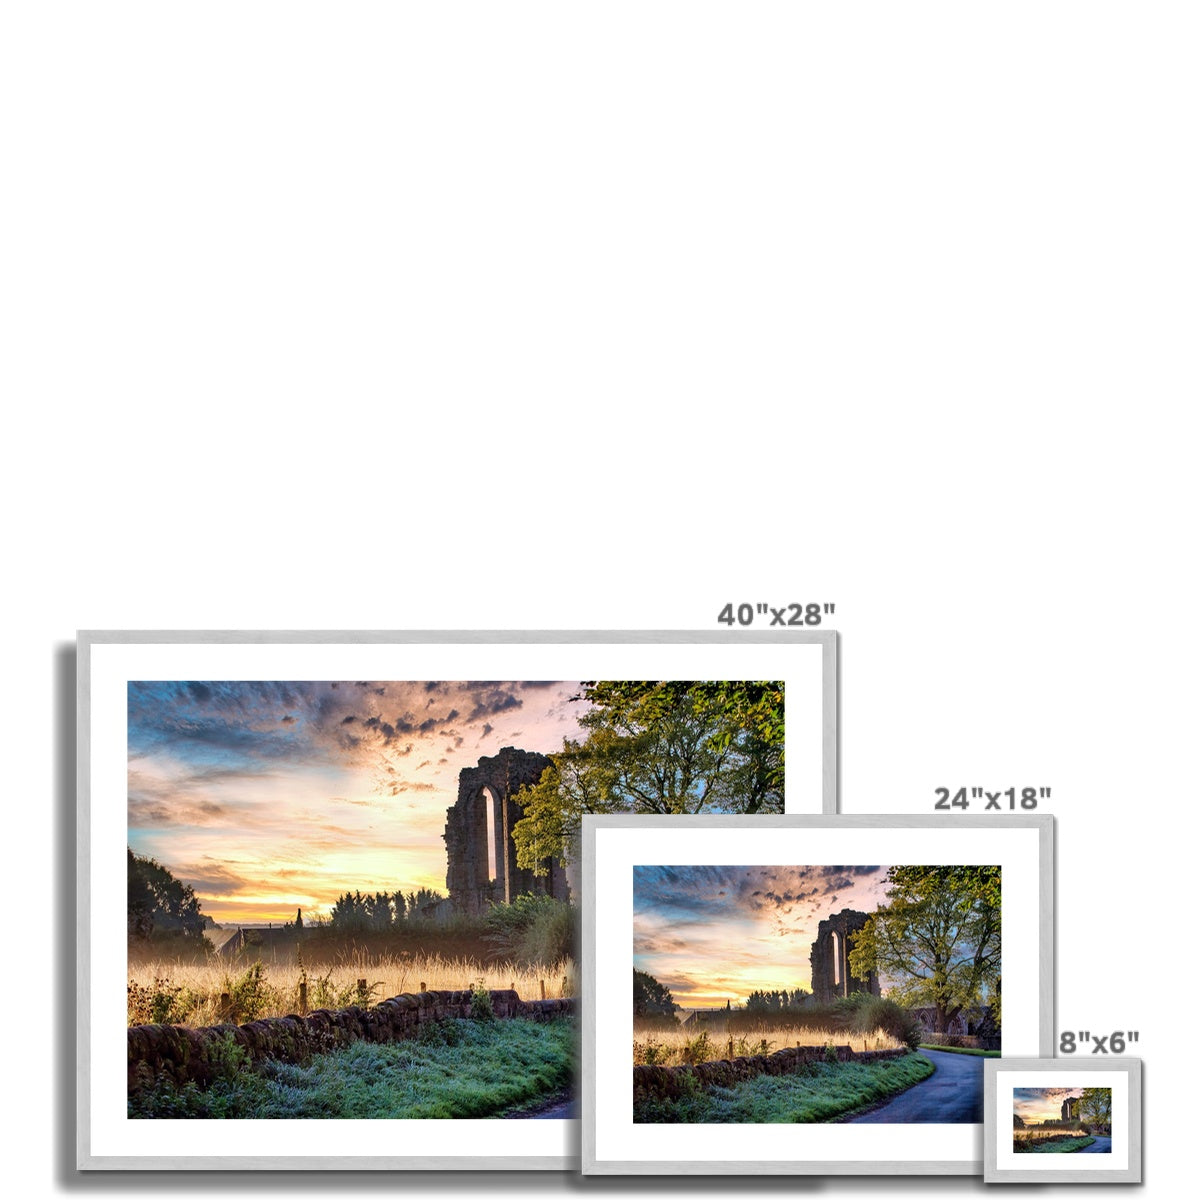 Dawn's Embrace at Croxden Abbey Antique Framed & Mounted Print